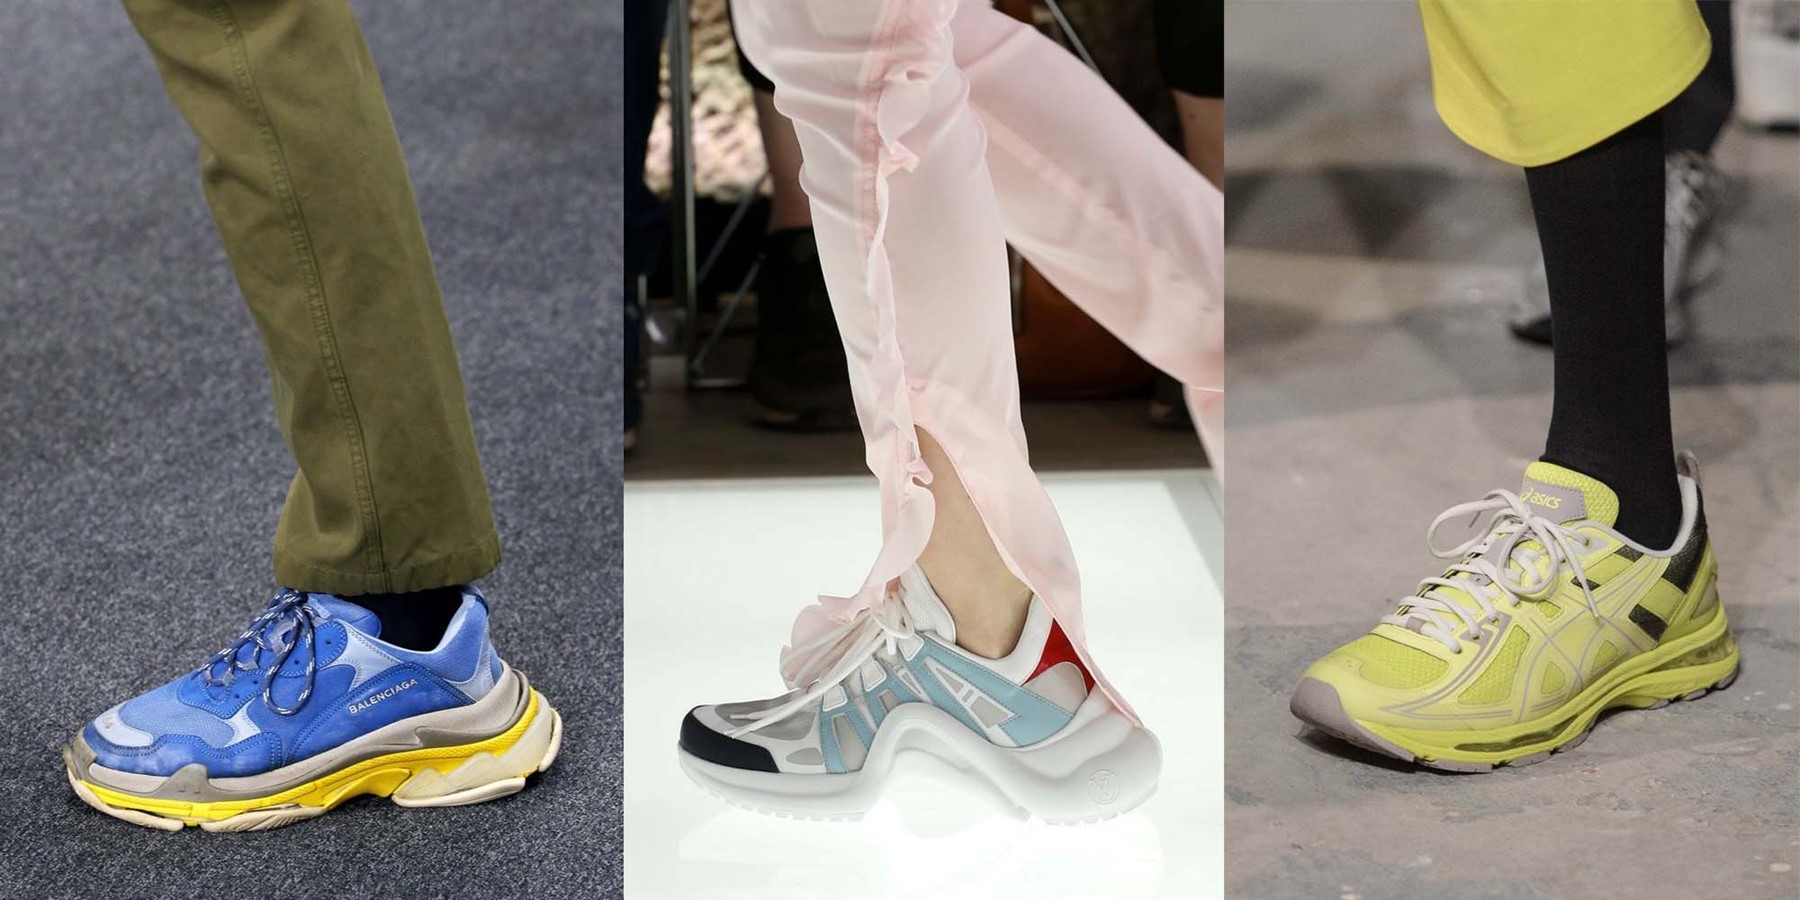 The best ugly sneakers of 2018 – ranked